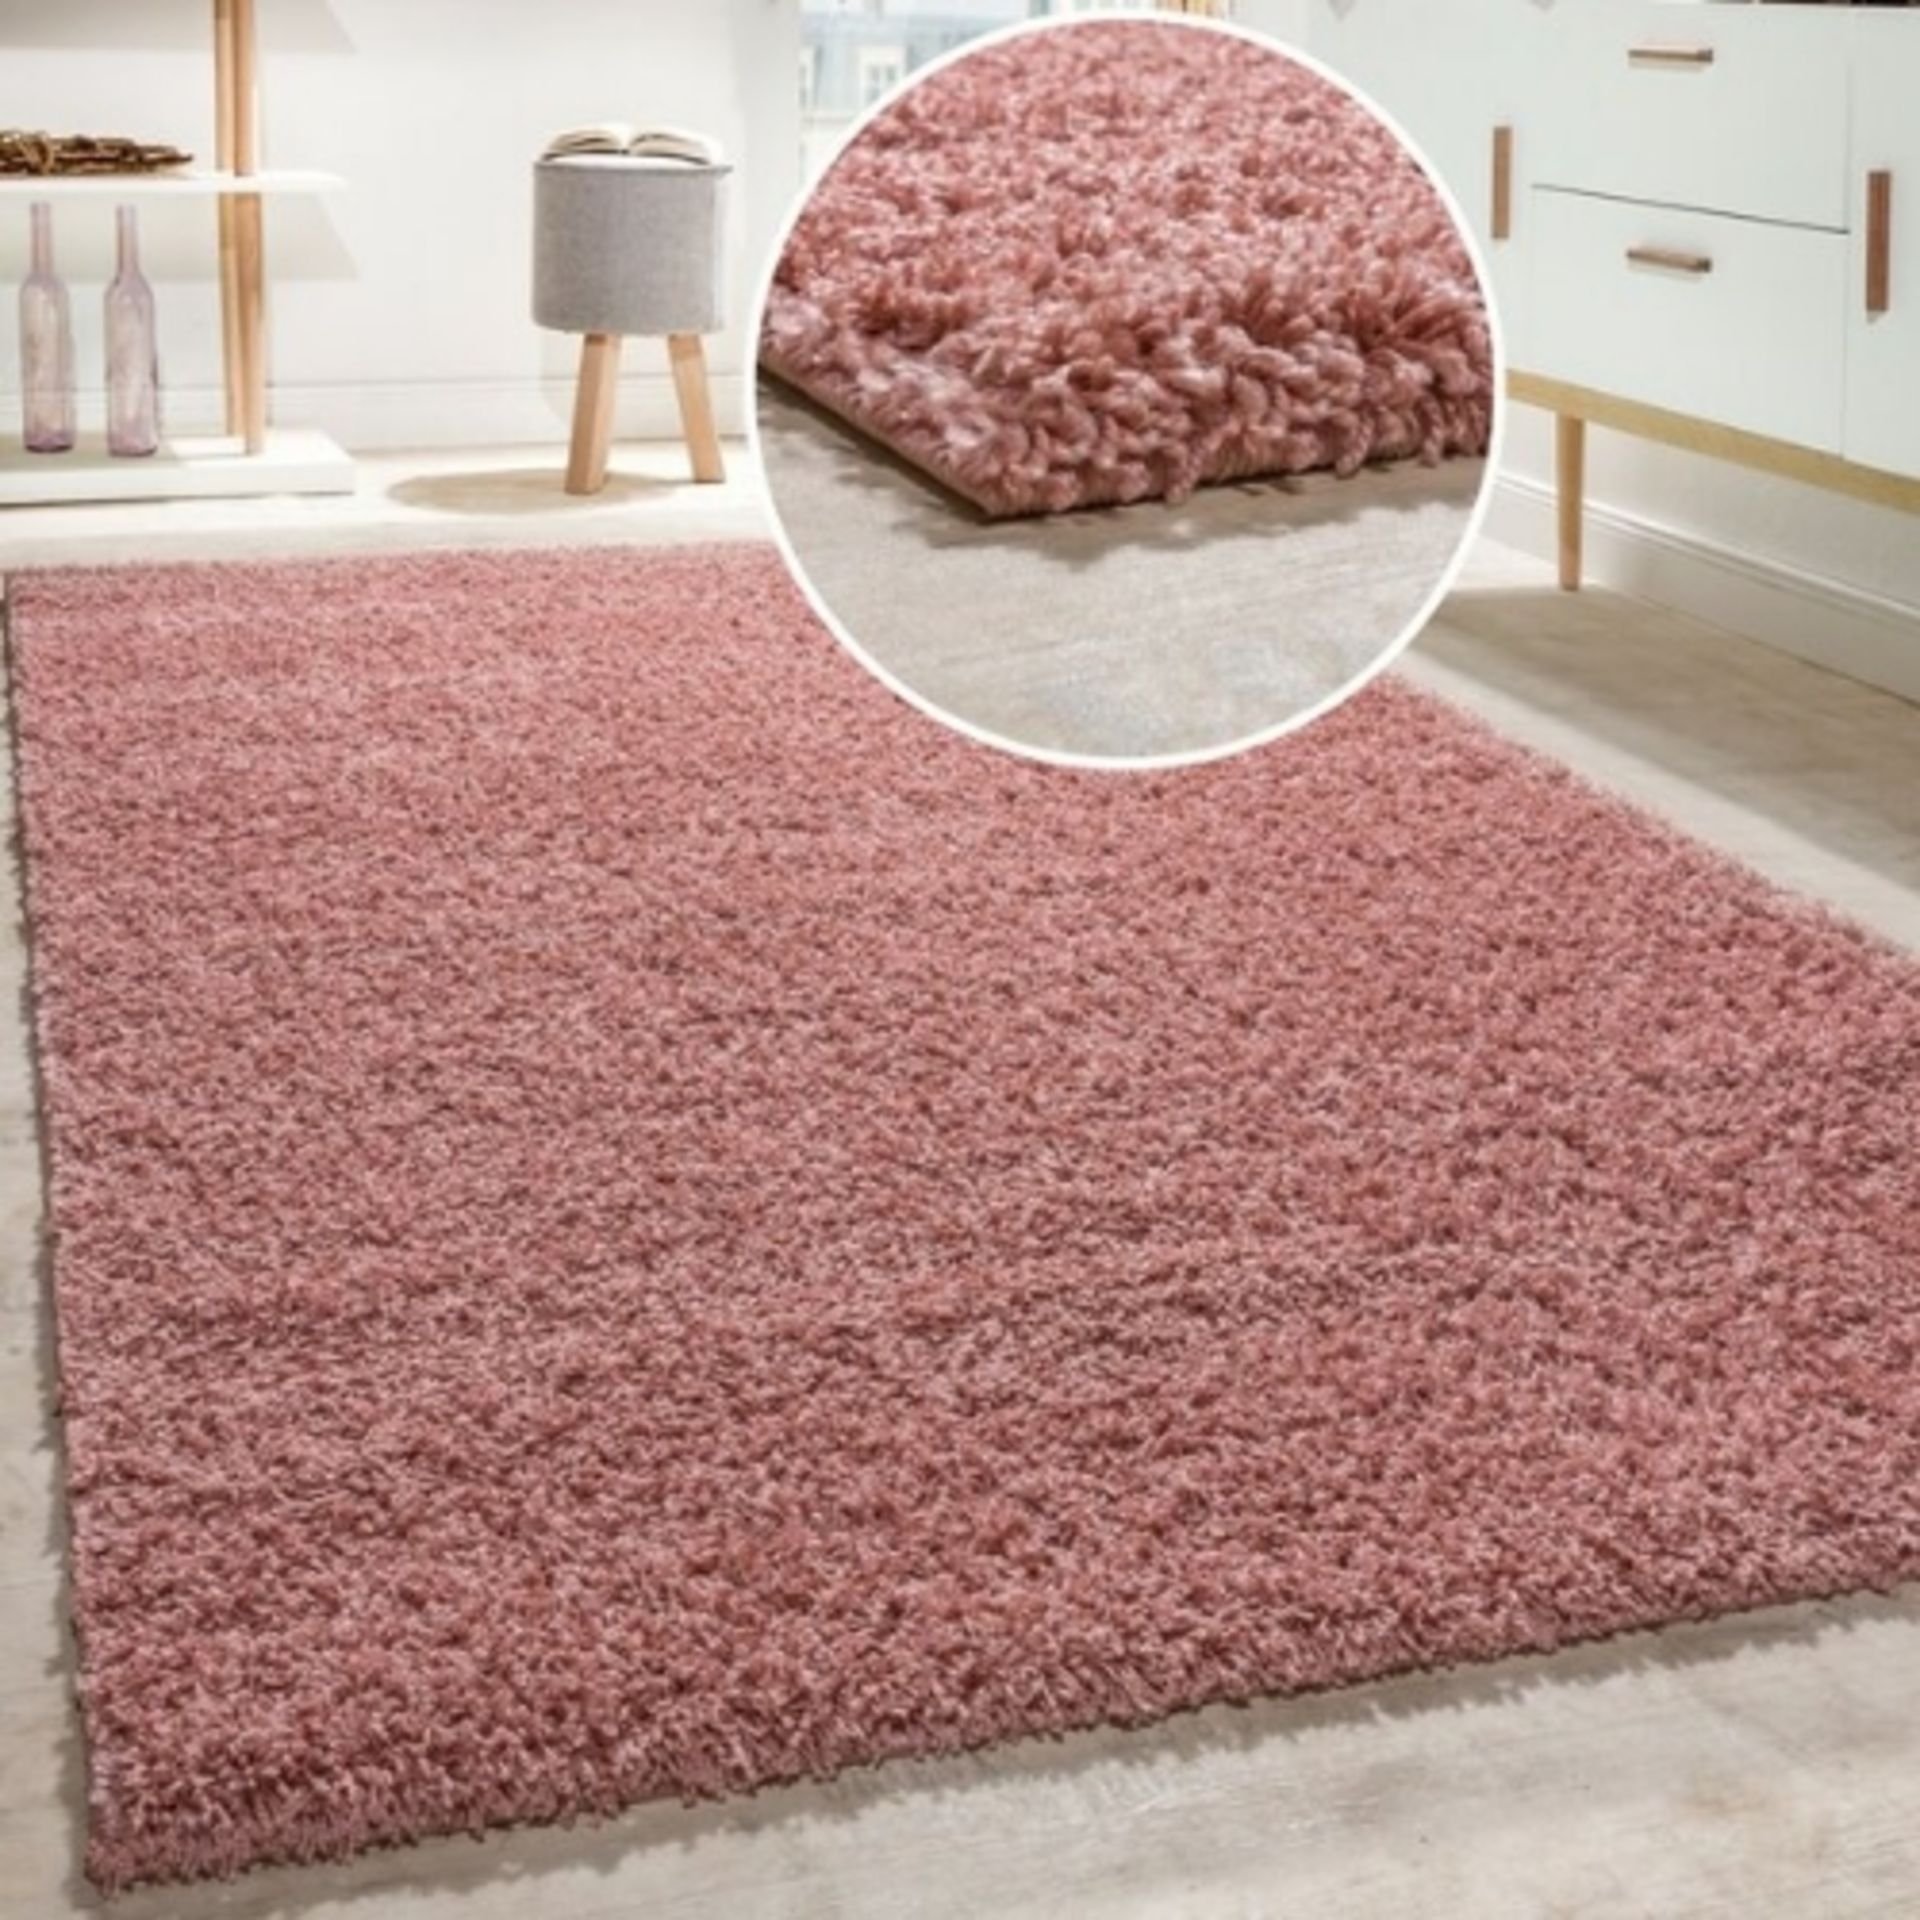 Epperson Pink Shaggy Rug by Rosdorf Park,